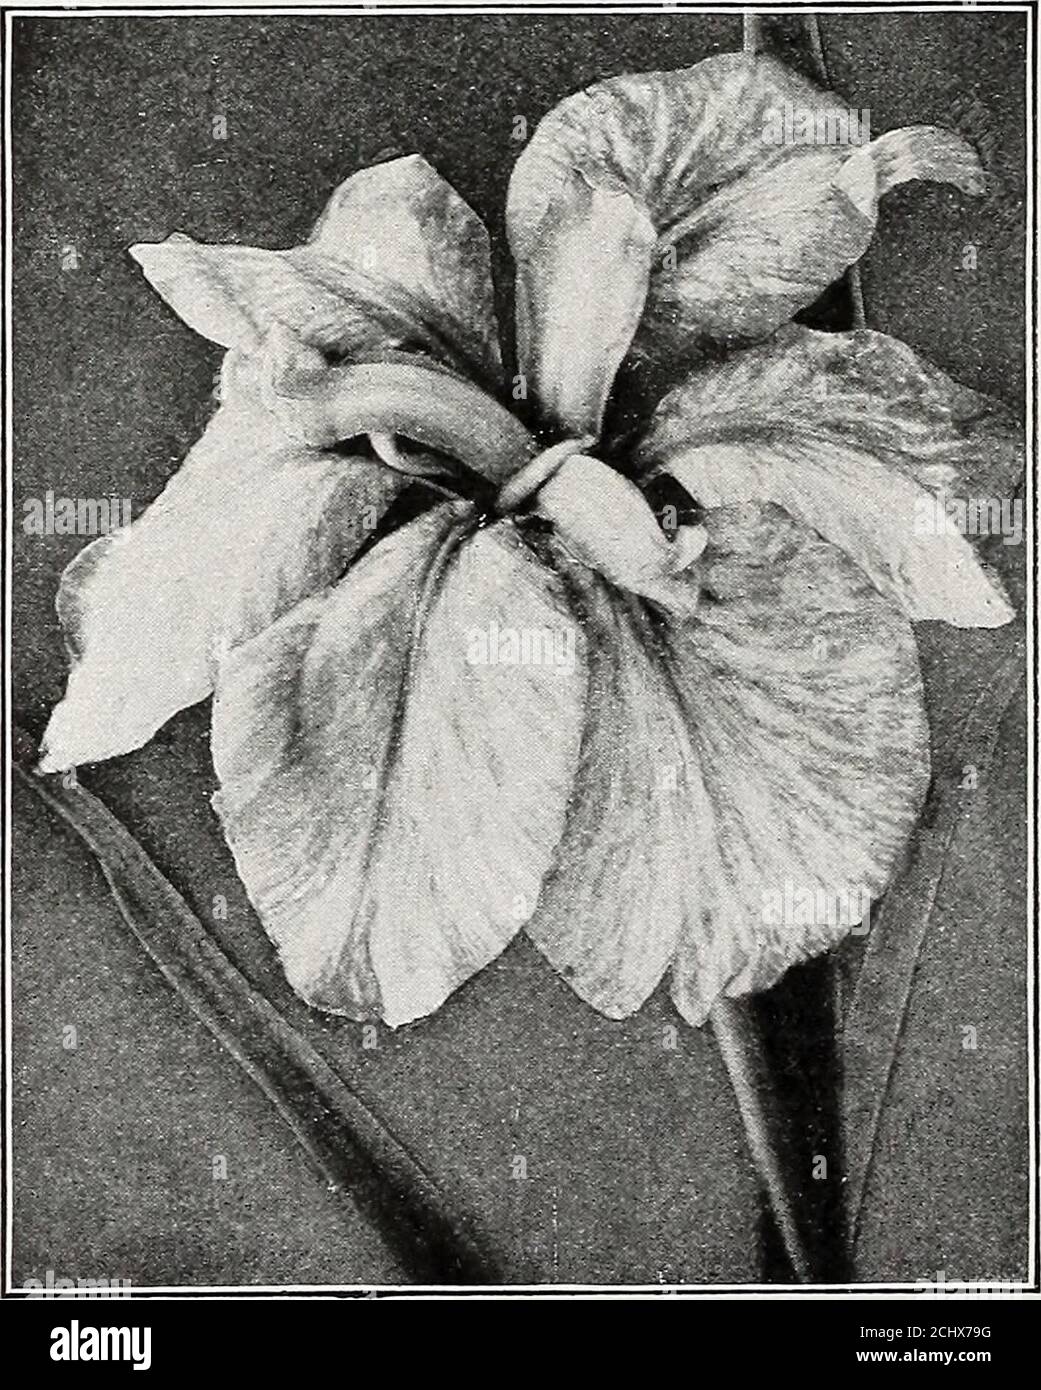 . Beckert's bulb catalogue : fall 1916 . e a wide range of colors. Choice mixed. 03 30 $2 00Anglica, Mt. Blanc. Pure white. Splendid for cutting 04 35 2 25 *Filifolia. A grand variety for forcing. Large, sky-blue and substantial flowers 05 50 Florentina. White. Flowers two weeksearlier than the Germanica. Can be easilyforced 05 50 *Germanica, Choice Named. Hardy spring-flowering plants; thrive everywhere 10 1 00 7 50 Reticulata. If potted early, will bloom inJanuary. The flowers are rich purple andgold; violet-scented. Fine for the garden . 15 1 50Susiana (Mourning Iris). Flower large anddense Stock Photo